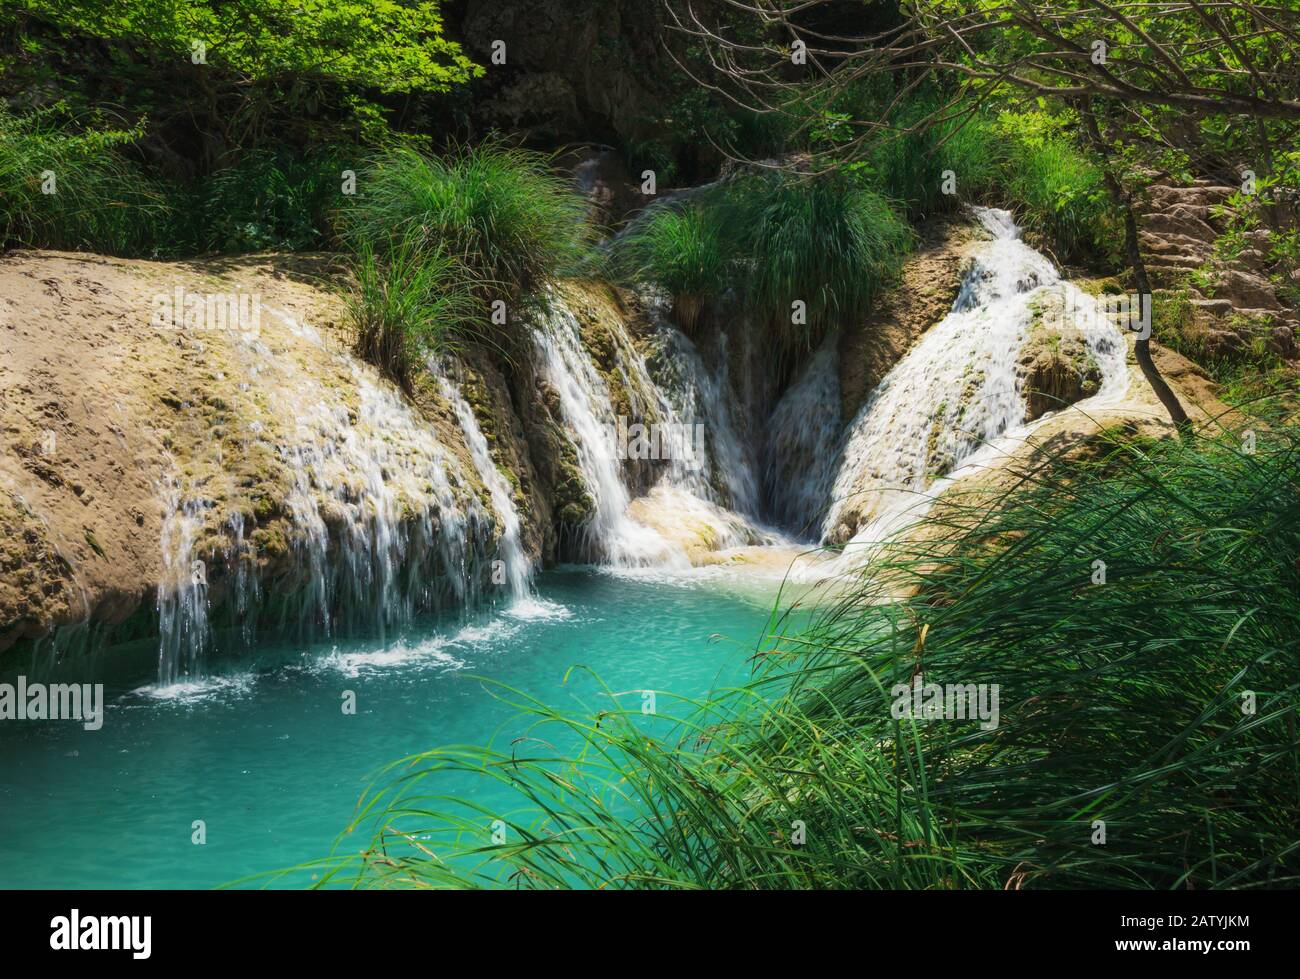 Polylimnio waterfall and its pool in one of the gorges of Peloponnese in Greece Stock Photo